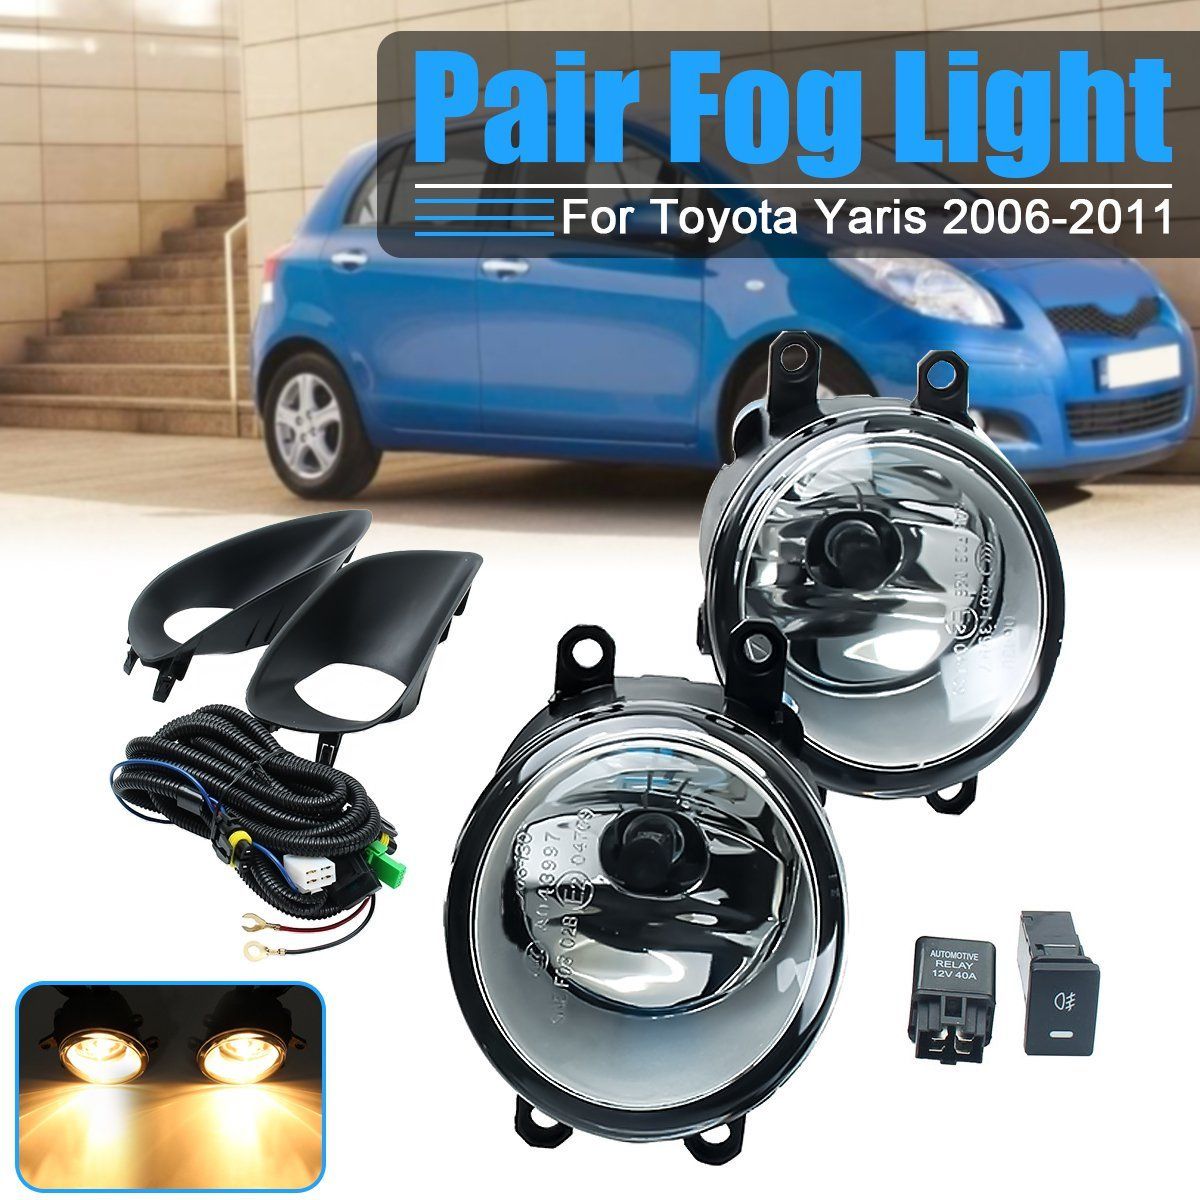 Car-Front-Bumper-Fog-Lights-with-H11-Bulbs-Wiring-Harness-6000K-Pair-for-Toyota-Yaris-4DR-Sedan-2006-939397